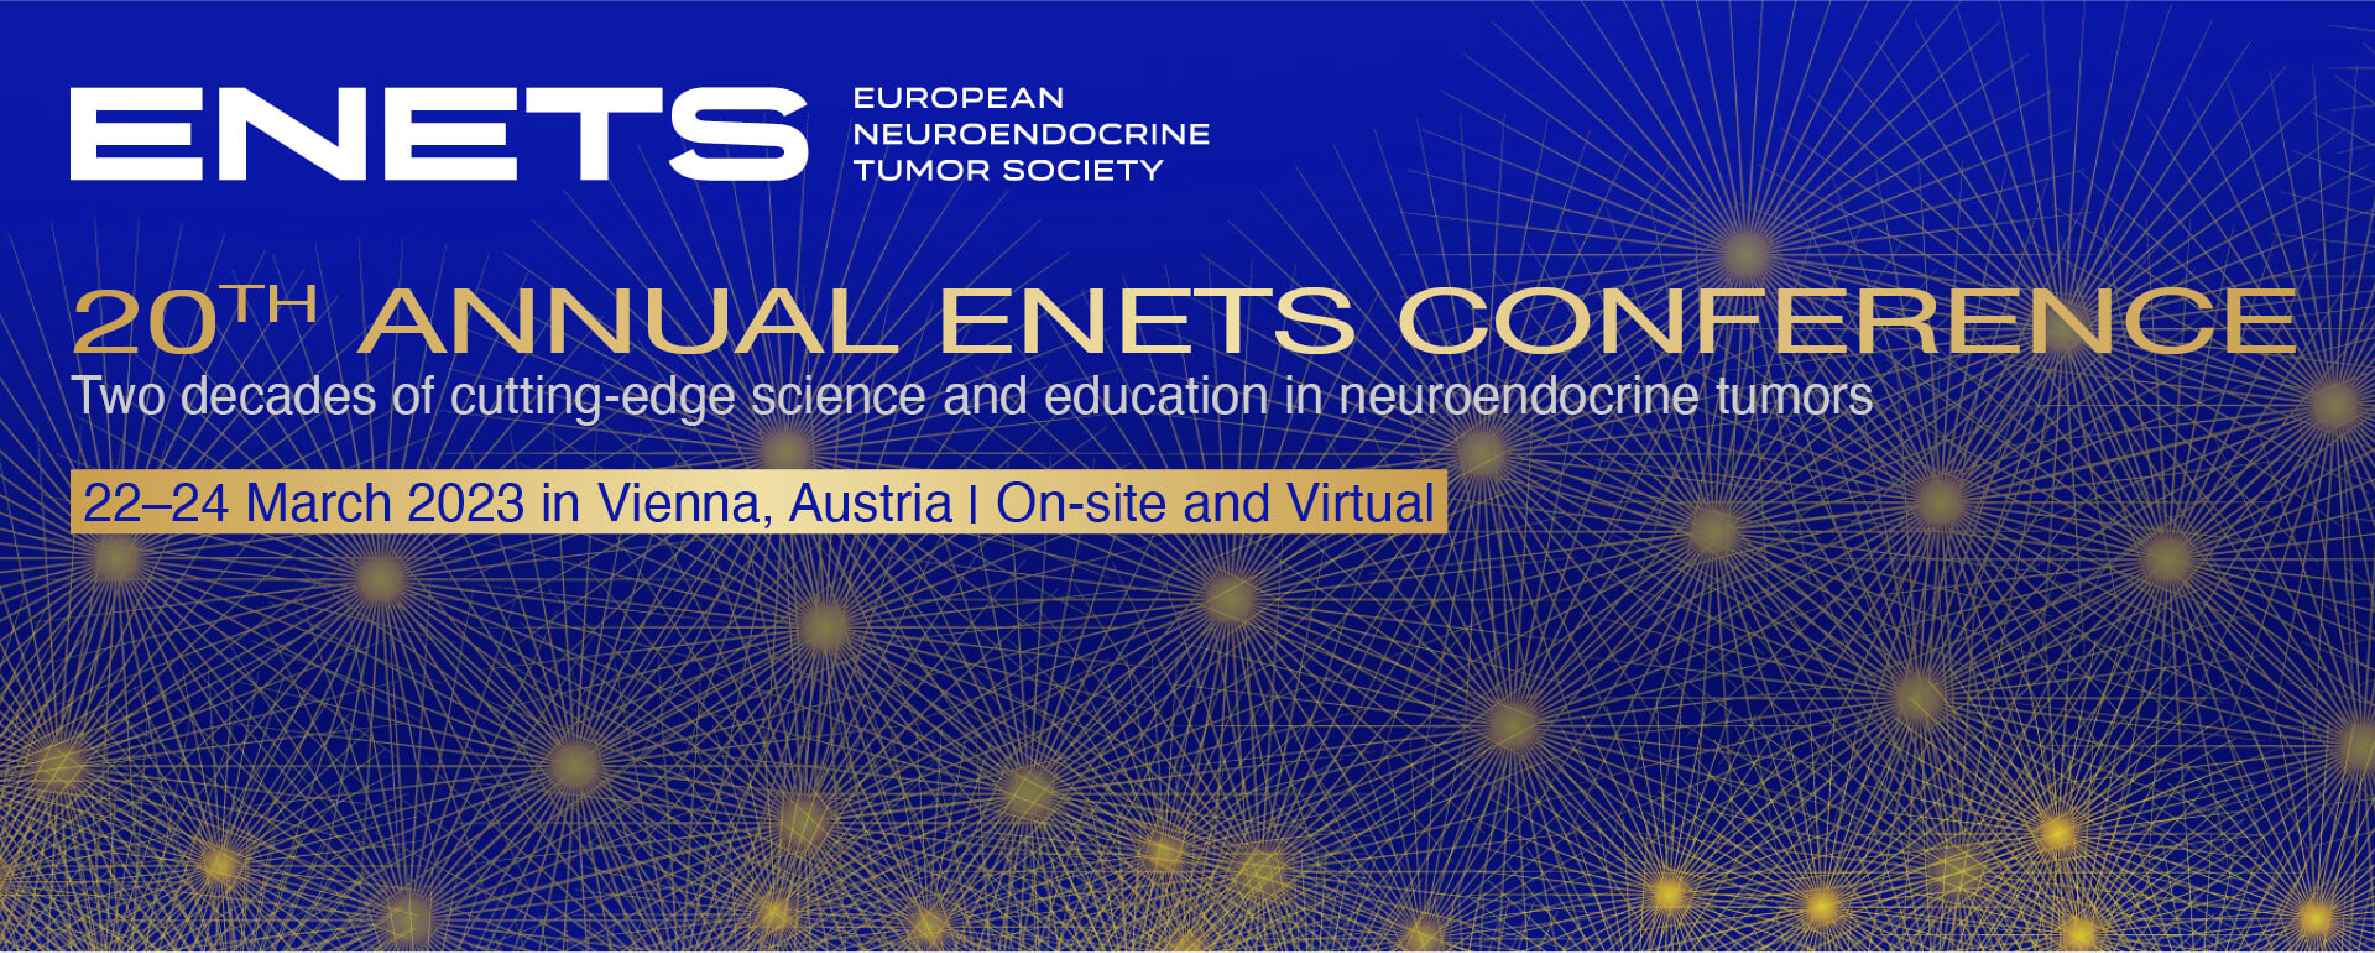 THE 20TH ANNUAL ENETS CONFERENCE - ENETS 2023